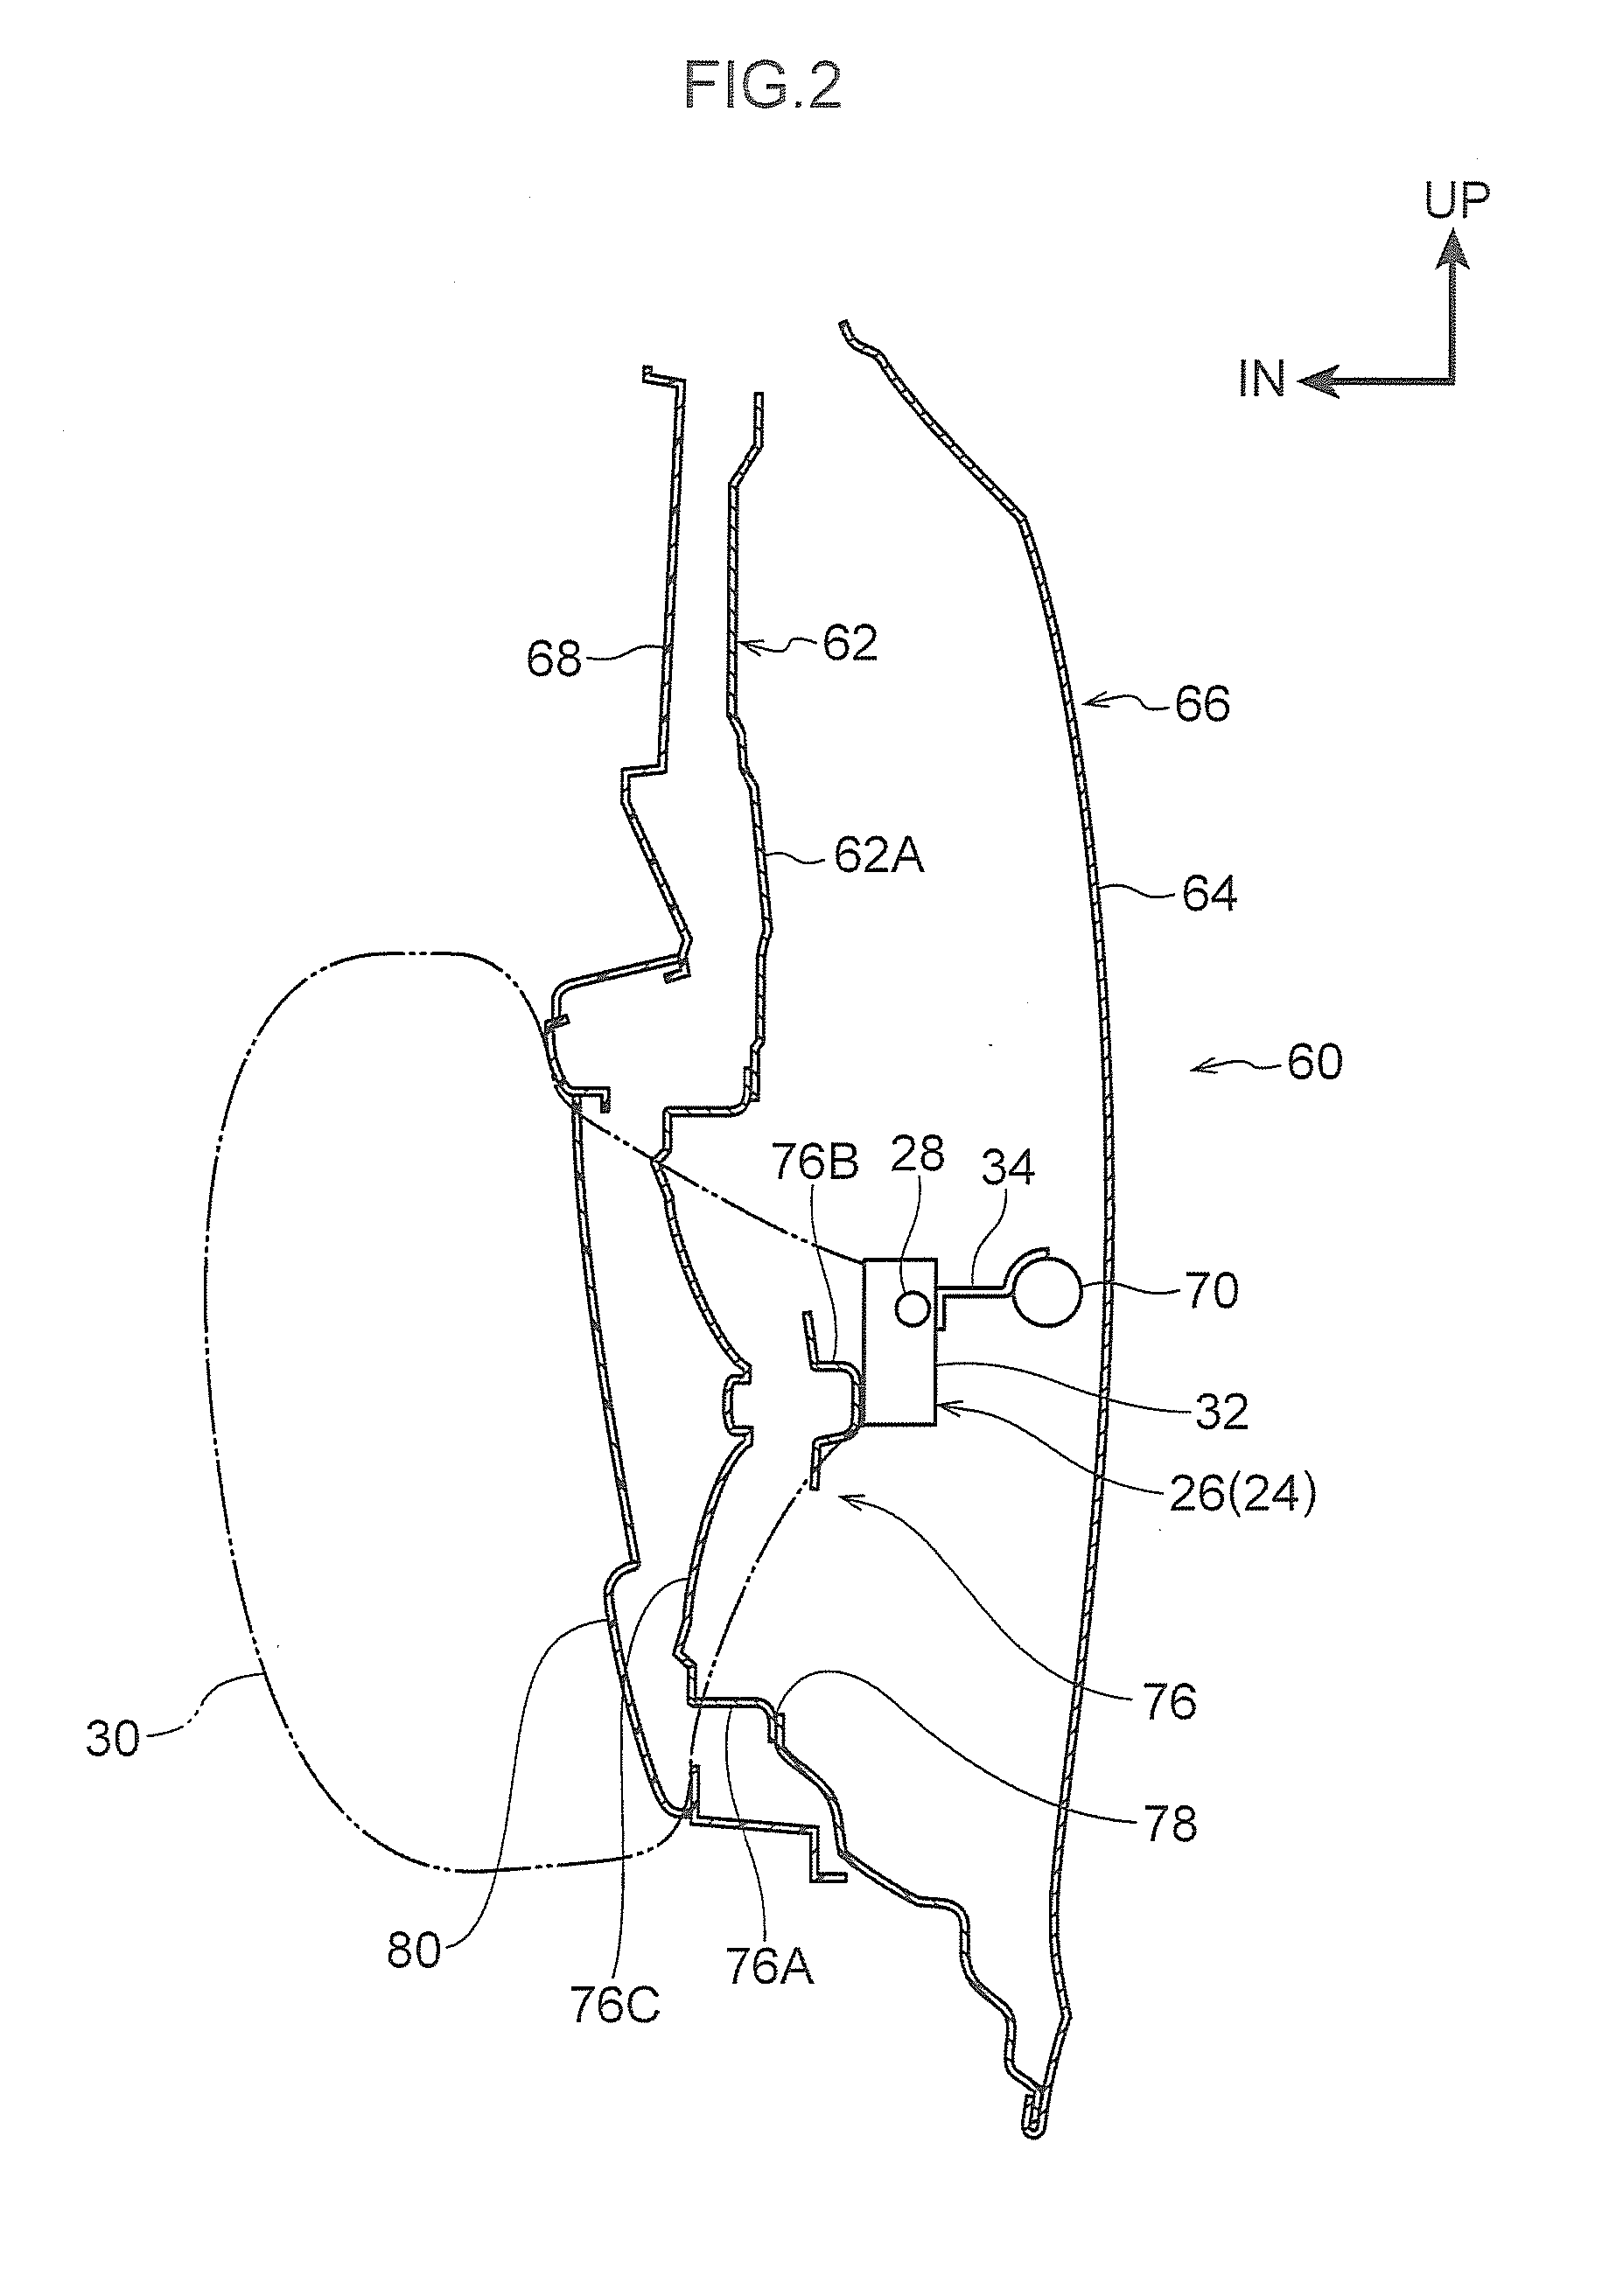 Knee side face restraint airbag device